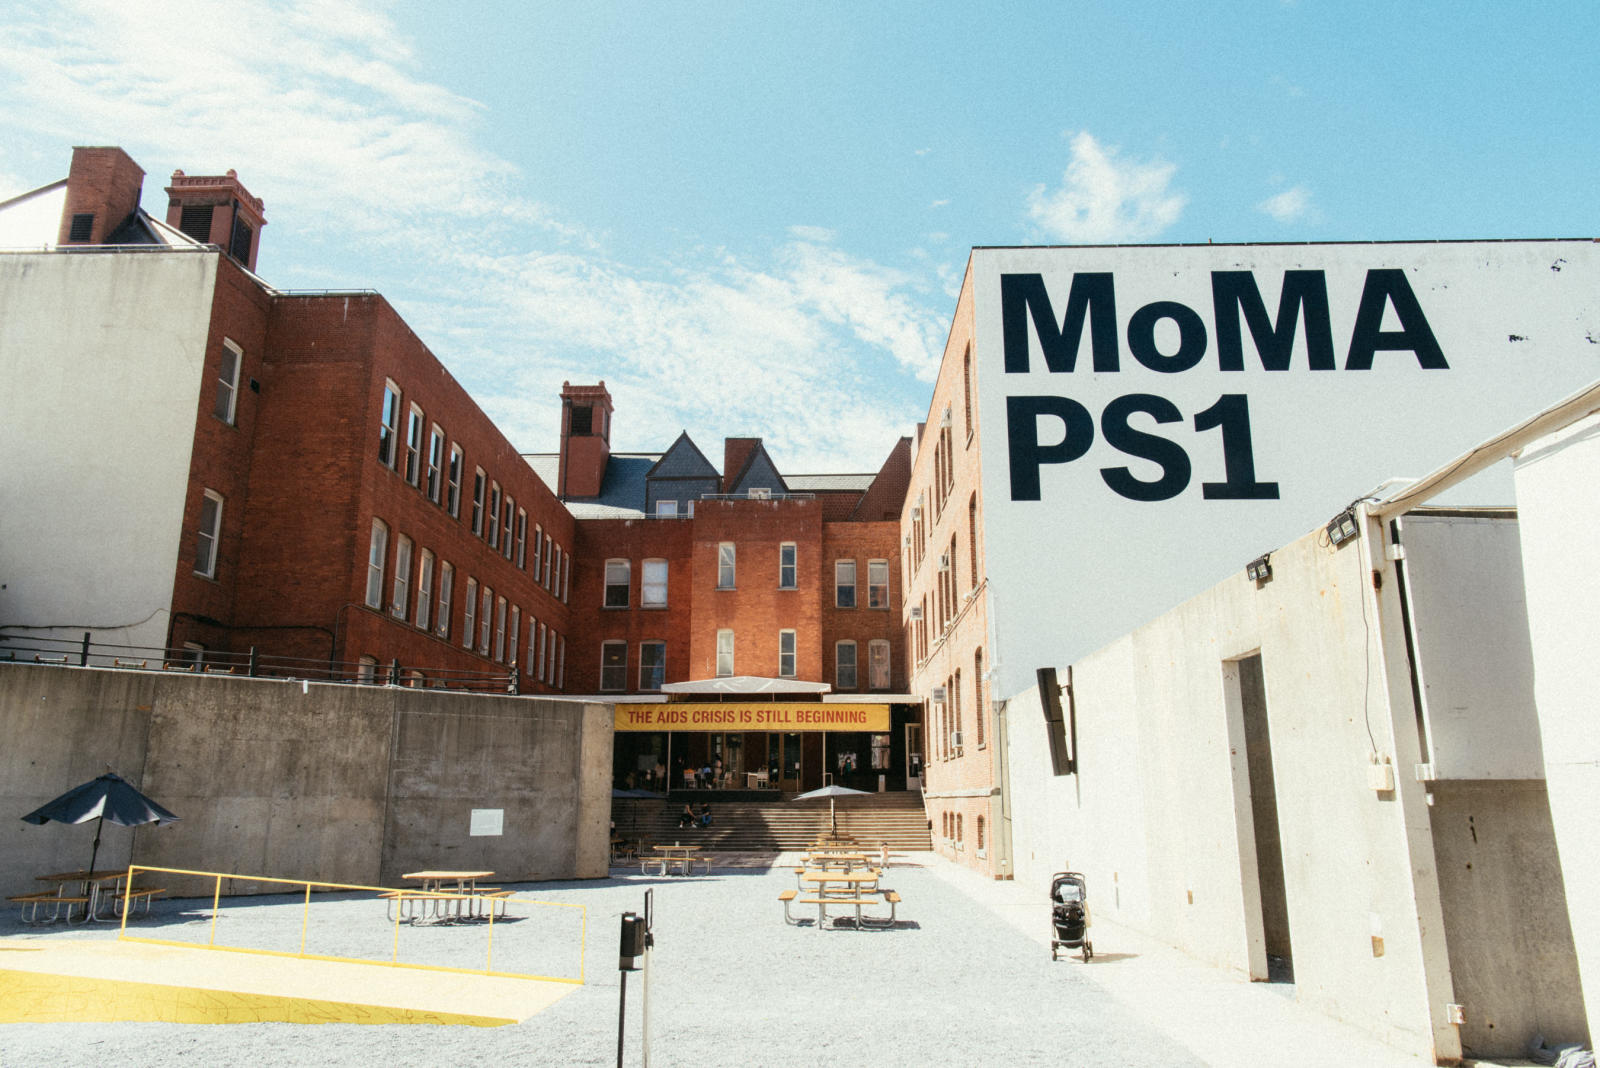 The plaza of MoMA PS1